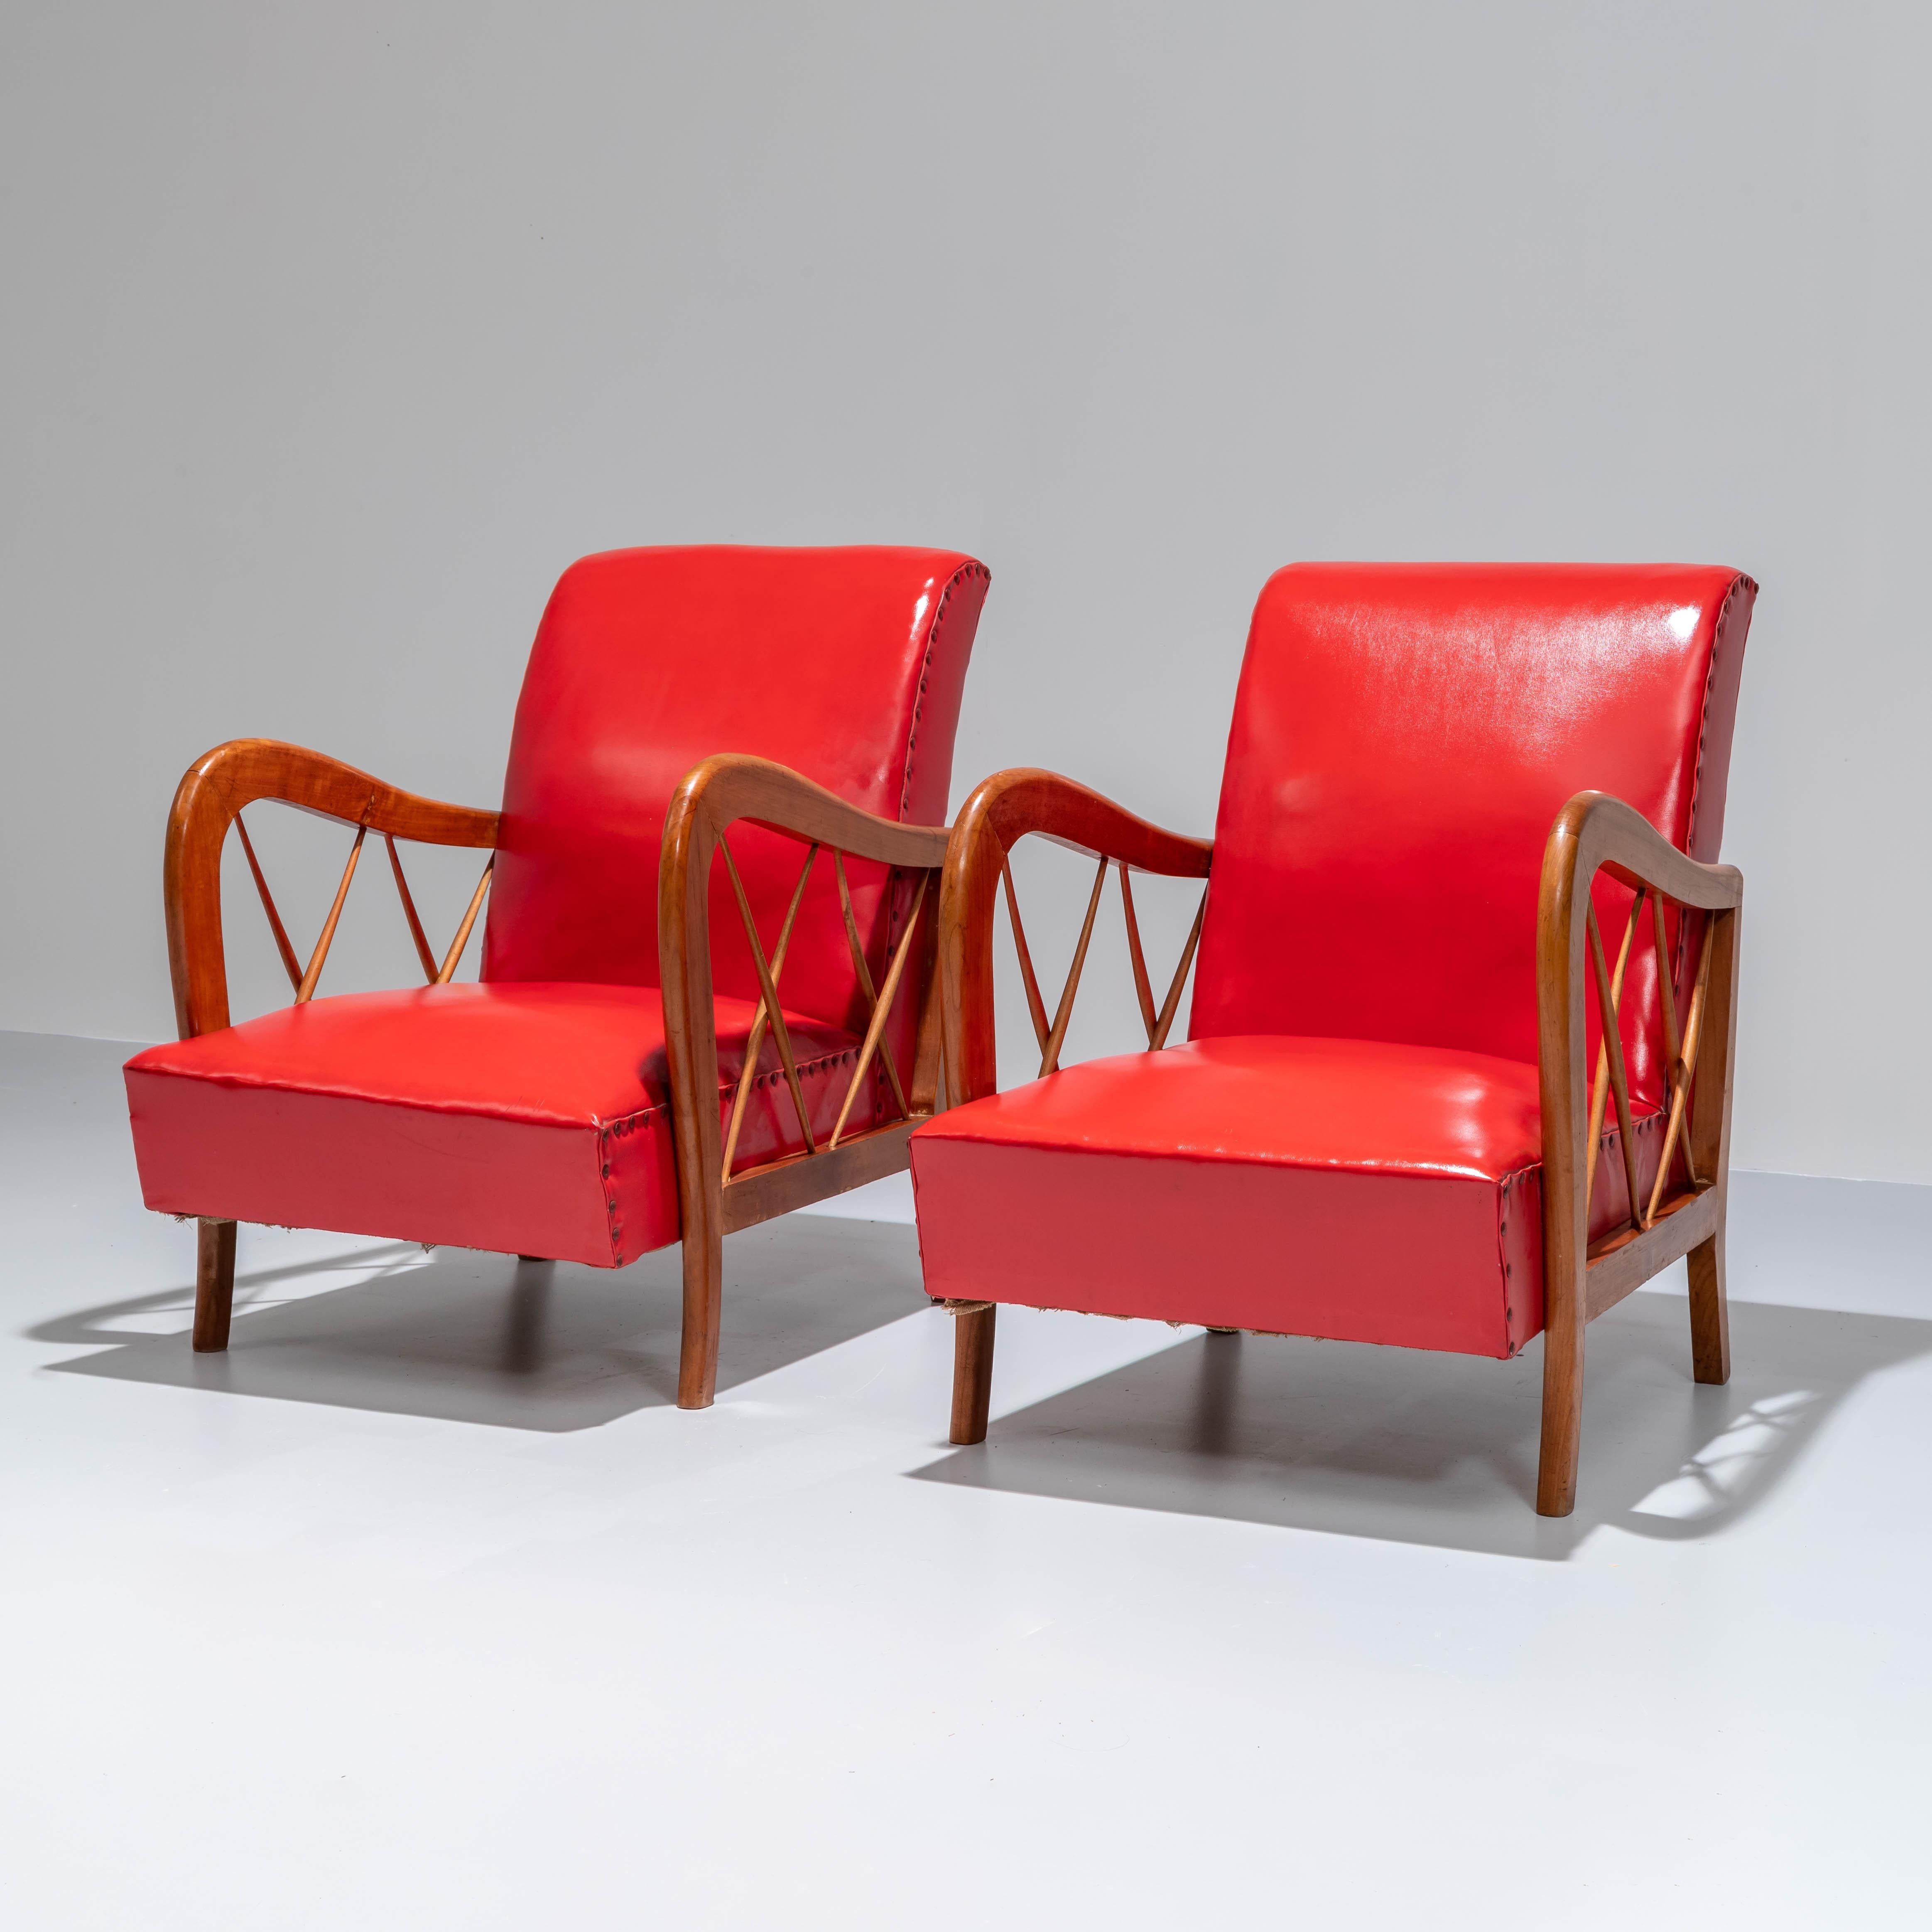 Lovely combination of colours: blonde wood and red upholstery and in the well-known style of Paolo Buffa: classical but playful. The curves in the armrest together with the tapered cross bars that run underneath the armrests create a graceful